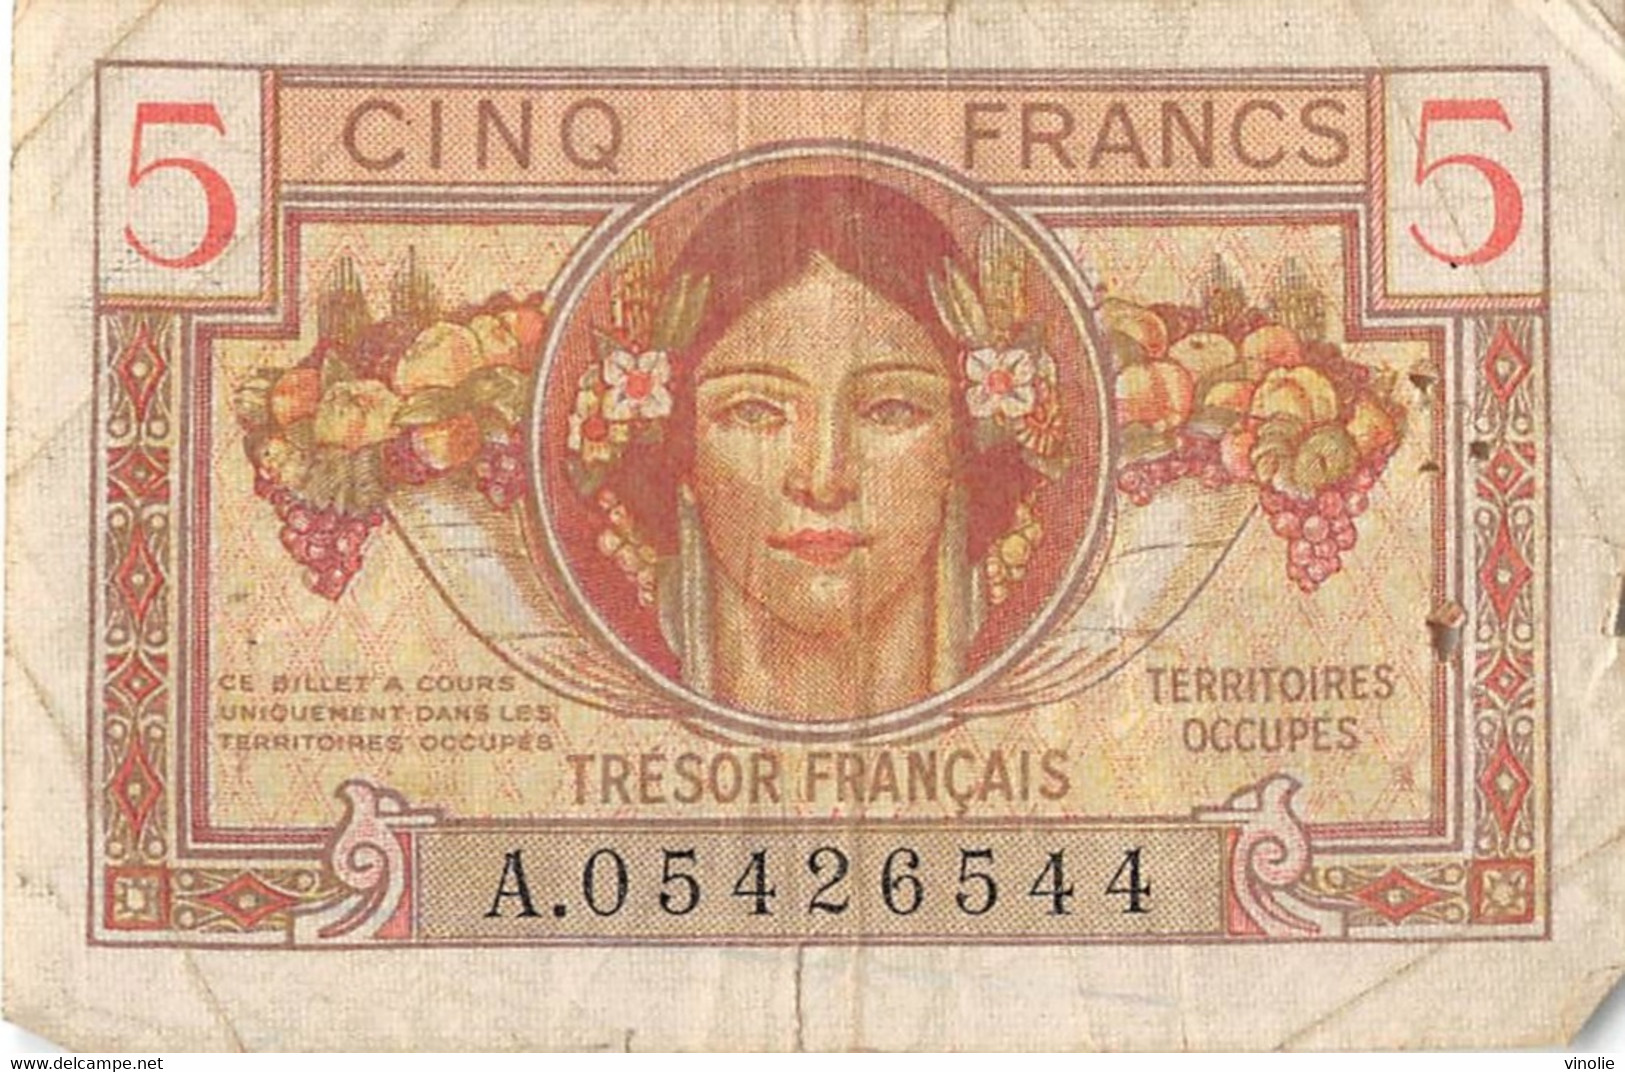 22-1850 : BILLET 5 FRANCS  TRESOR FRANCAIS TERRITOIRES OCCUPES - 1947 French Treasury